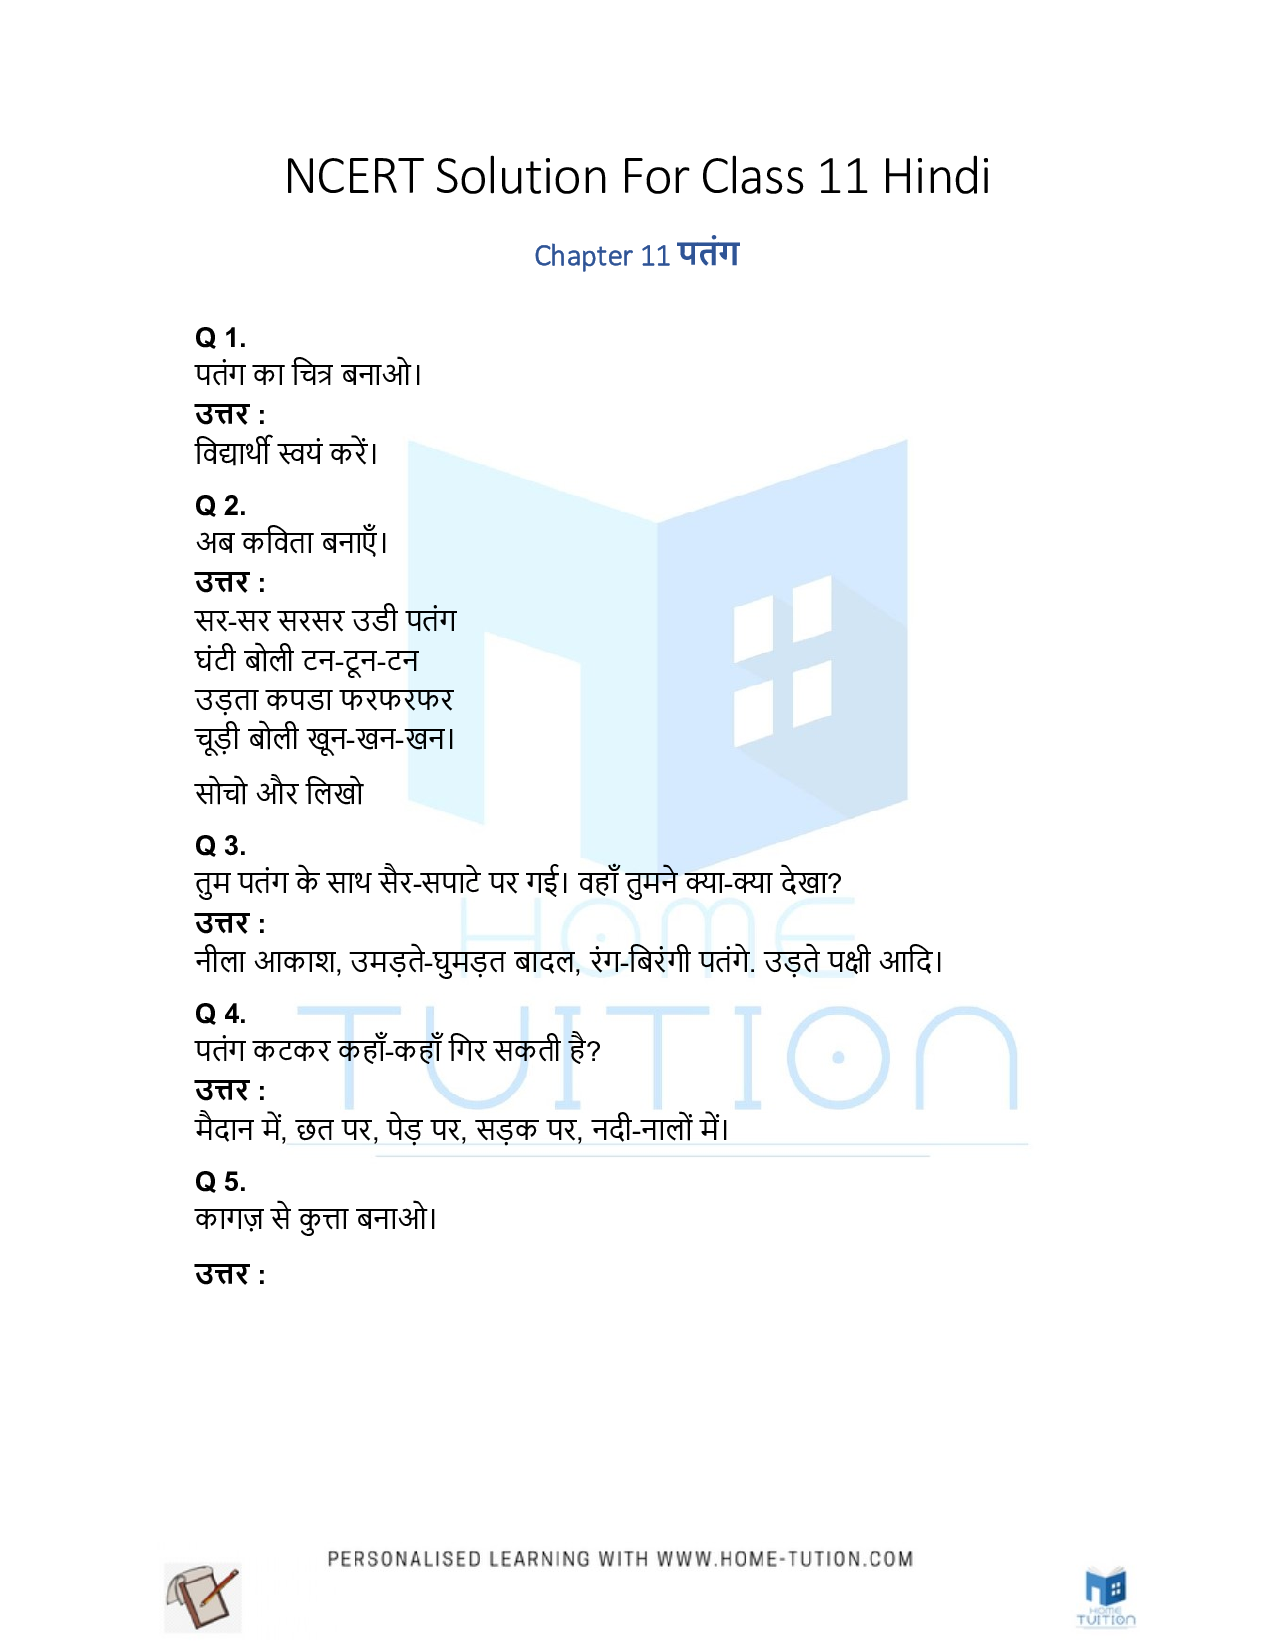 NCERT Solution for Class 1 Hindi Chapter 11 Patang (पतंग)